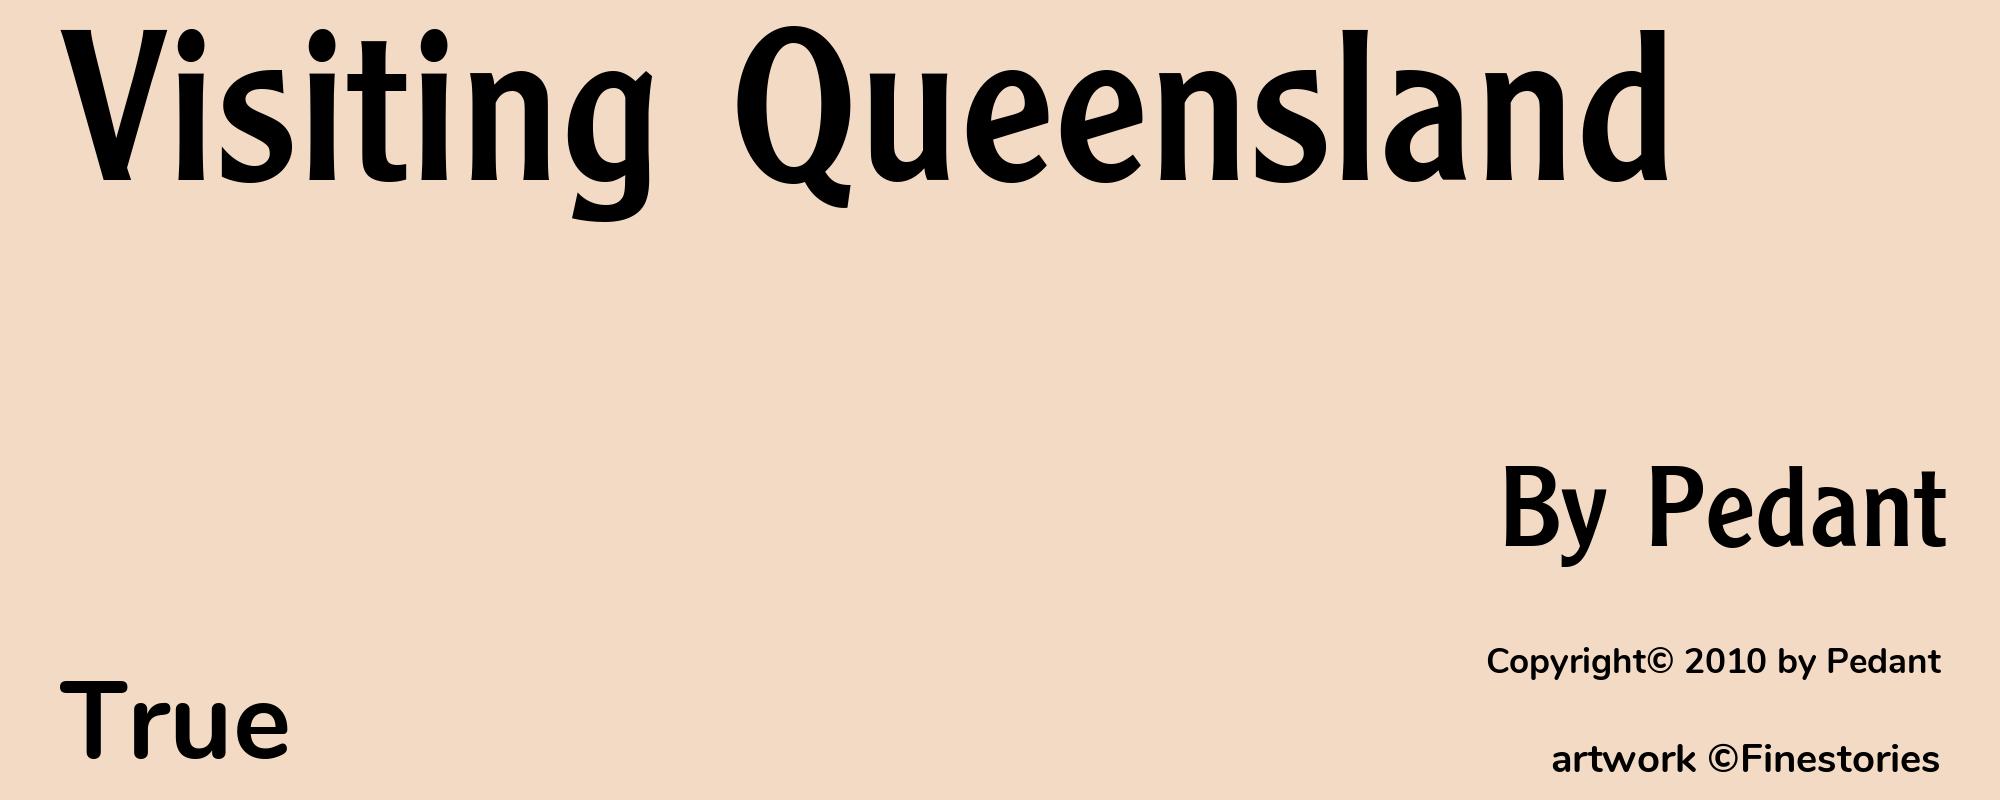 Visiting Queensland - Cover